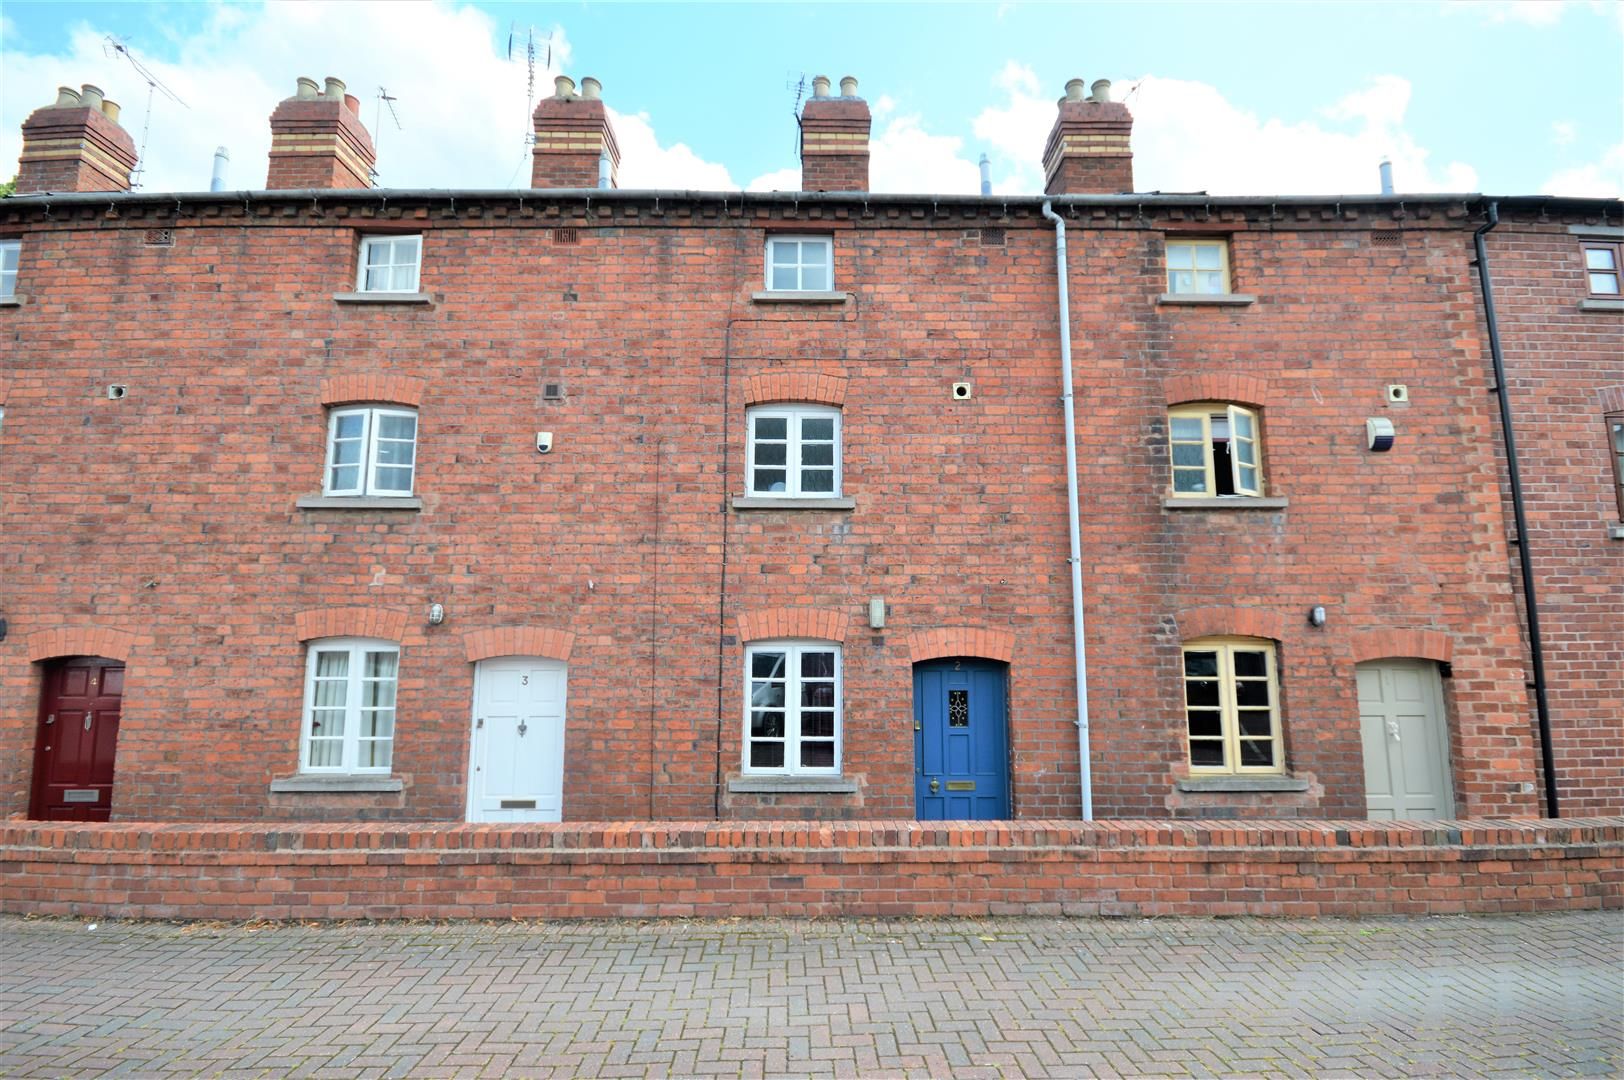 3 bed town house for sale in Hereford - Property Image 1